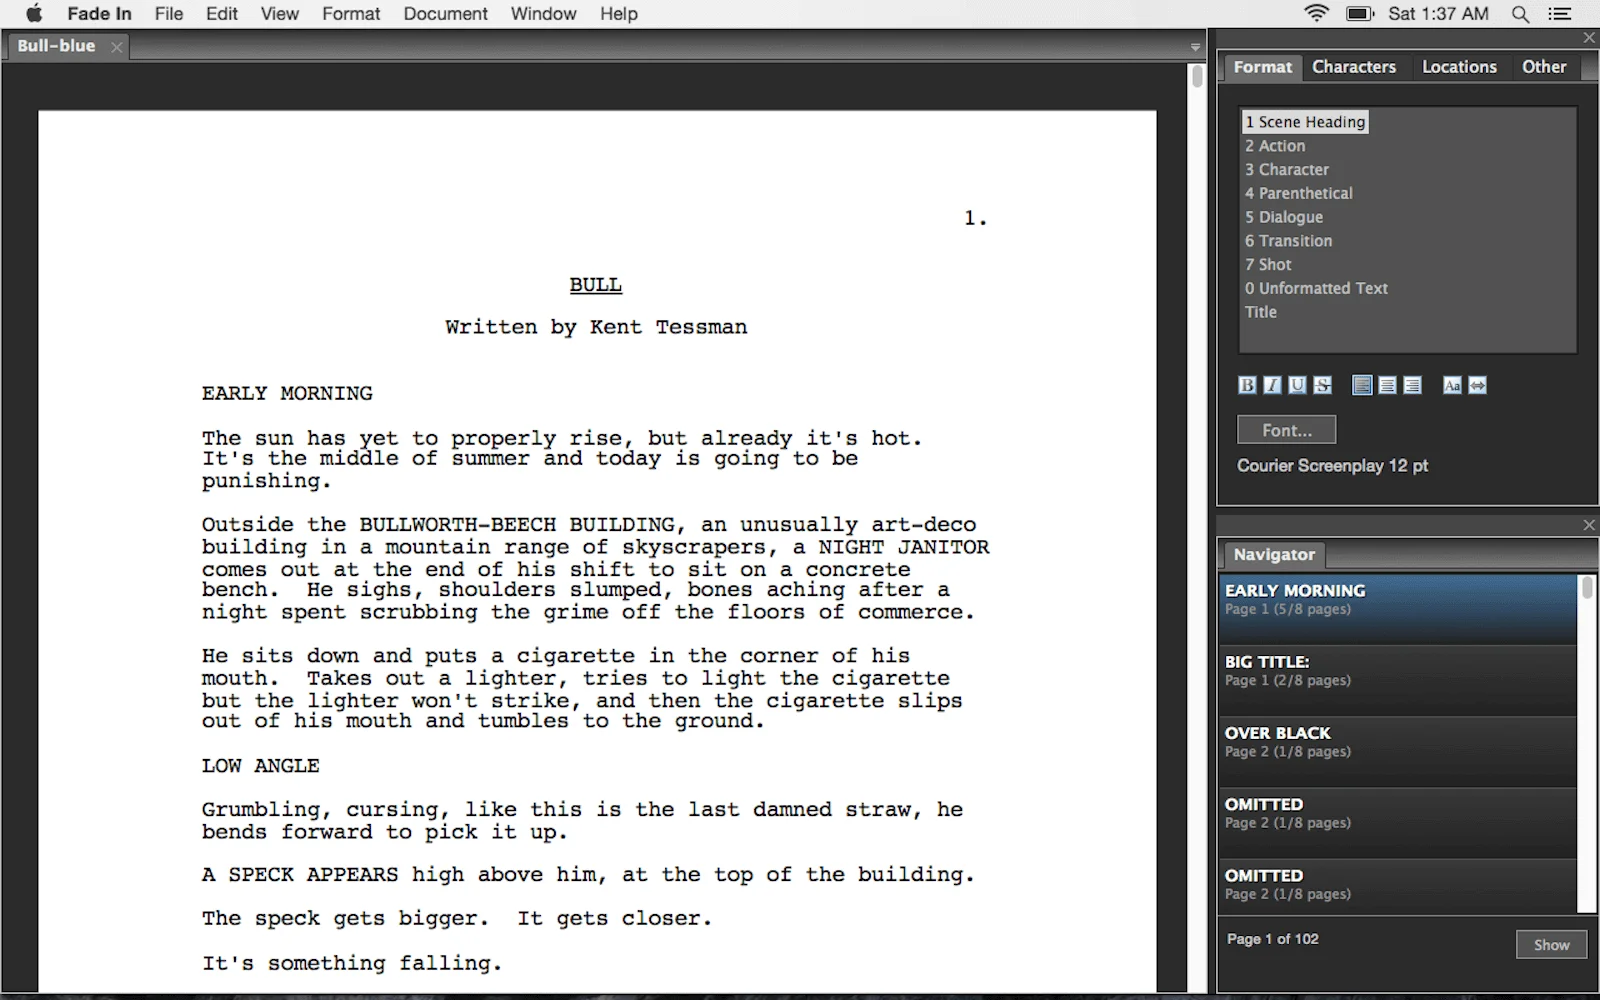 Best Screenwriting Software for Film and TV - Fade In Script Writing Software